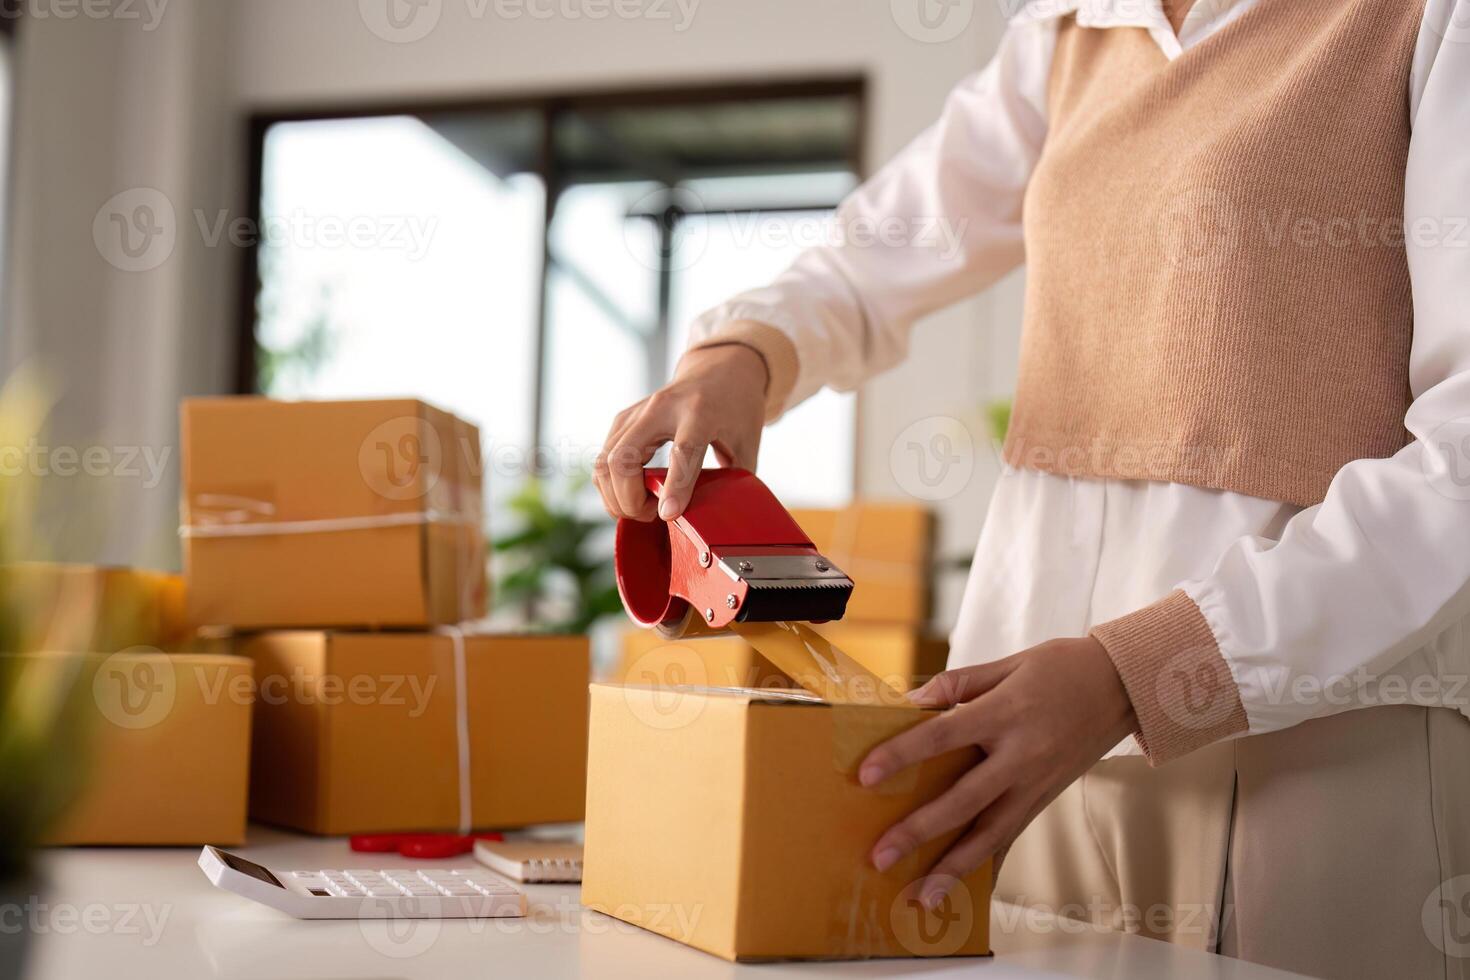 Woman asian use scotch tape to attach parcel boxes to prepare goods for the process of packaging, shipping, online sale internet marketing ecommerce concept startup business idea photo